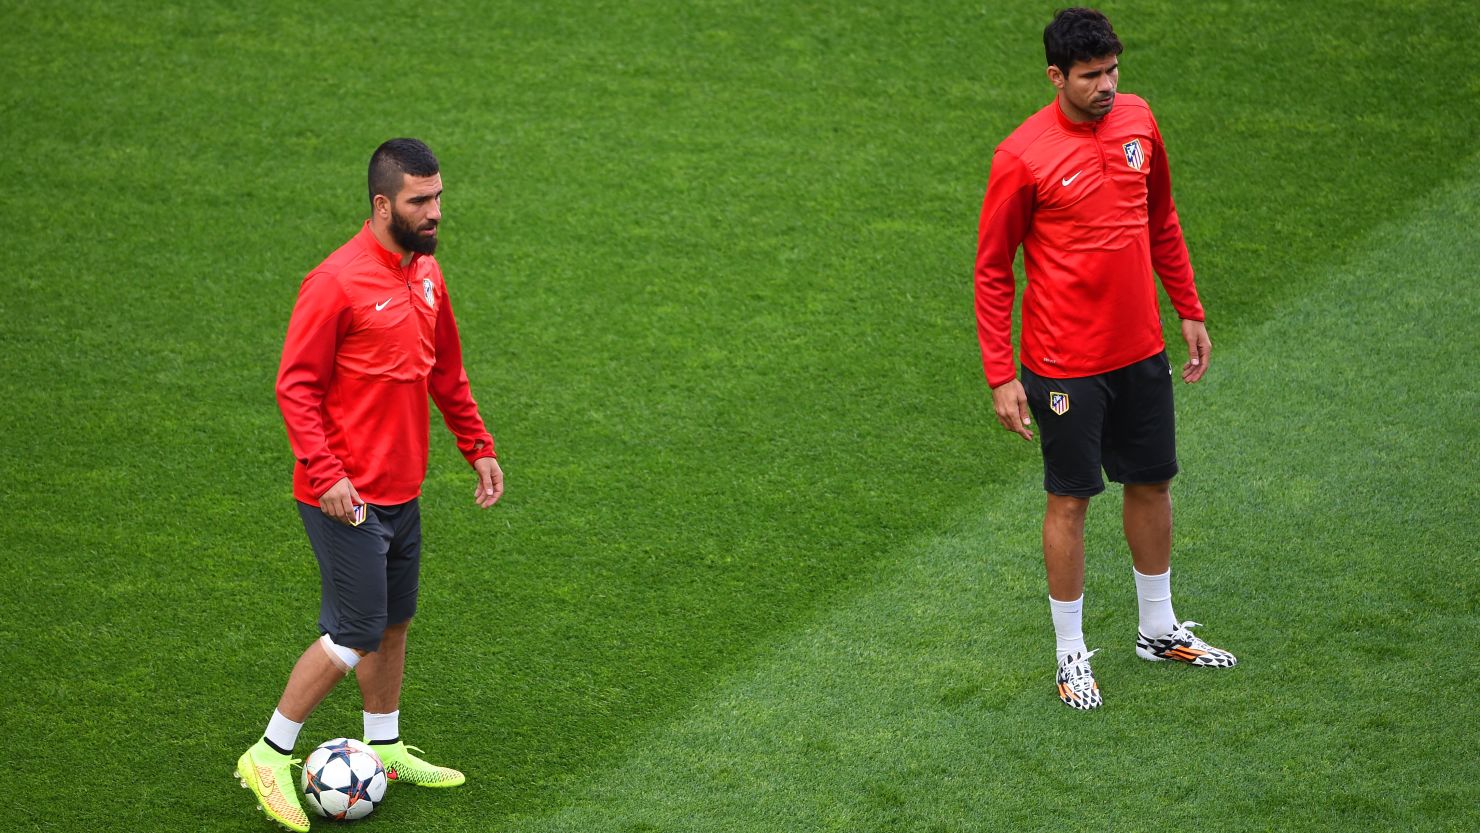 Arda Turan anad Diego Costa train with teammates ahead of the 2014 Champions League final in Lisbon.